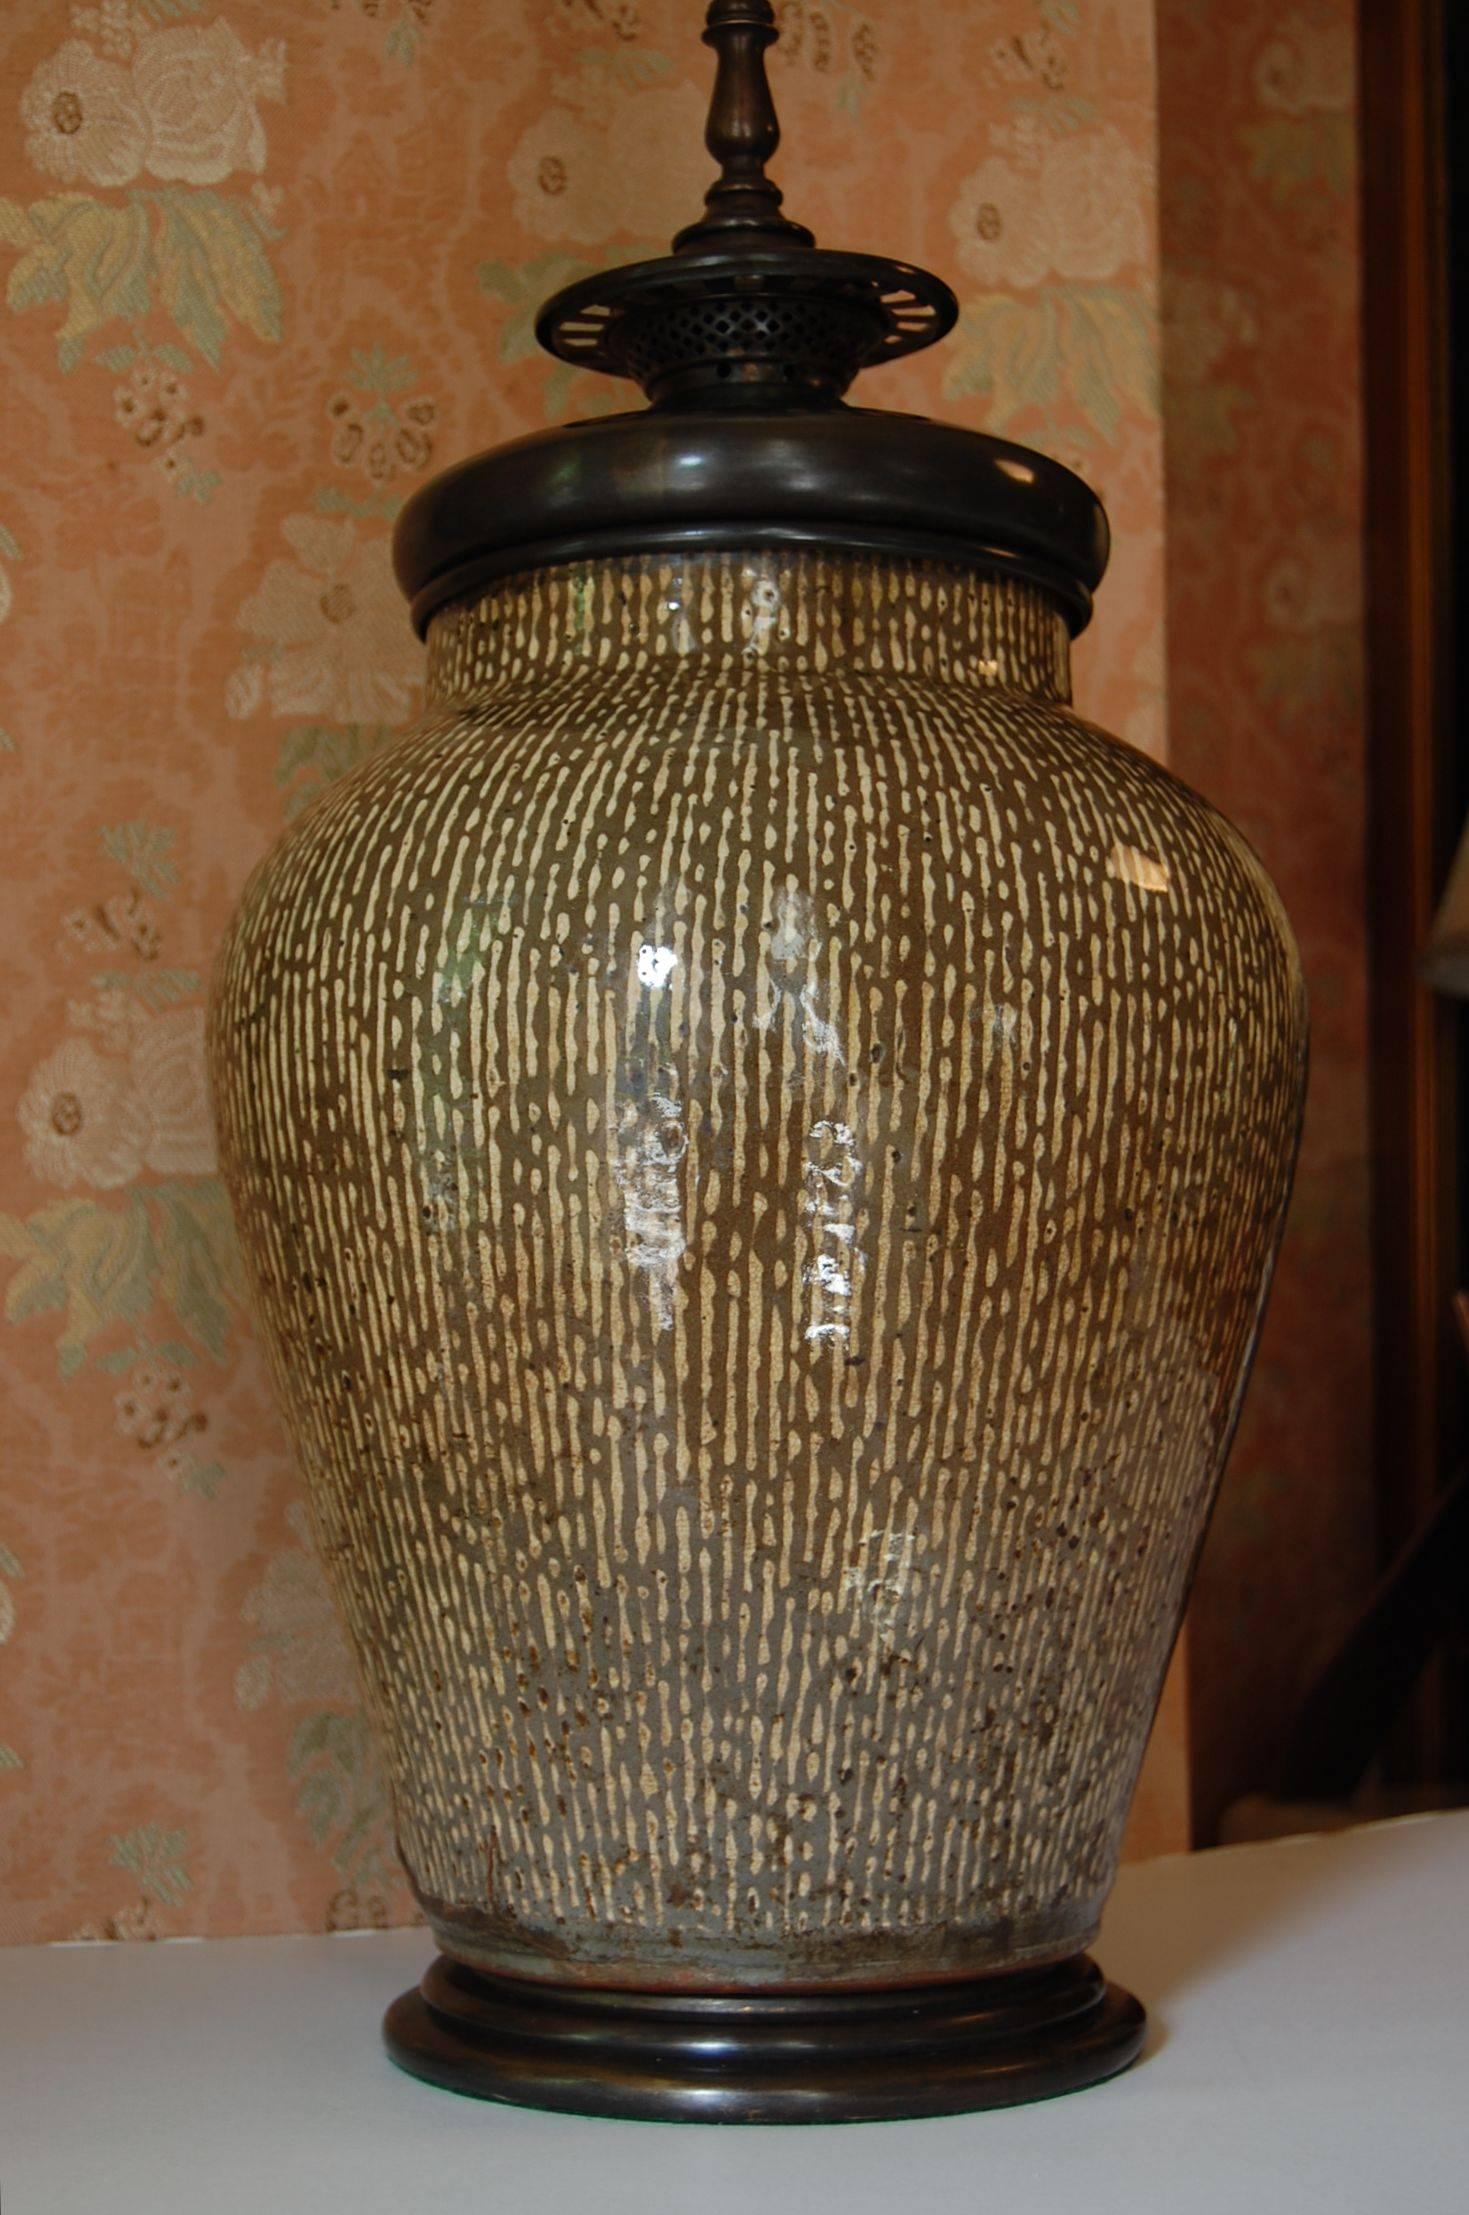 Wonderful large Asian, possibly Chinese or Korean urn wired as a lamp with original turn of the century brass base and fittings. Olive and ecru colored strie' glaze. Just cleaned and rewired with a three-way socket. Measures: 15" to the top of